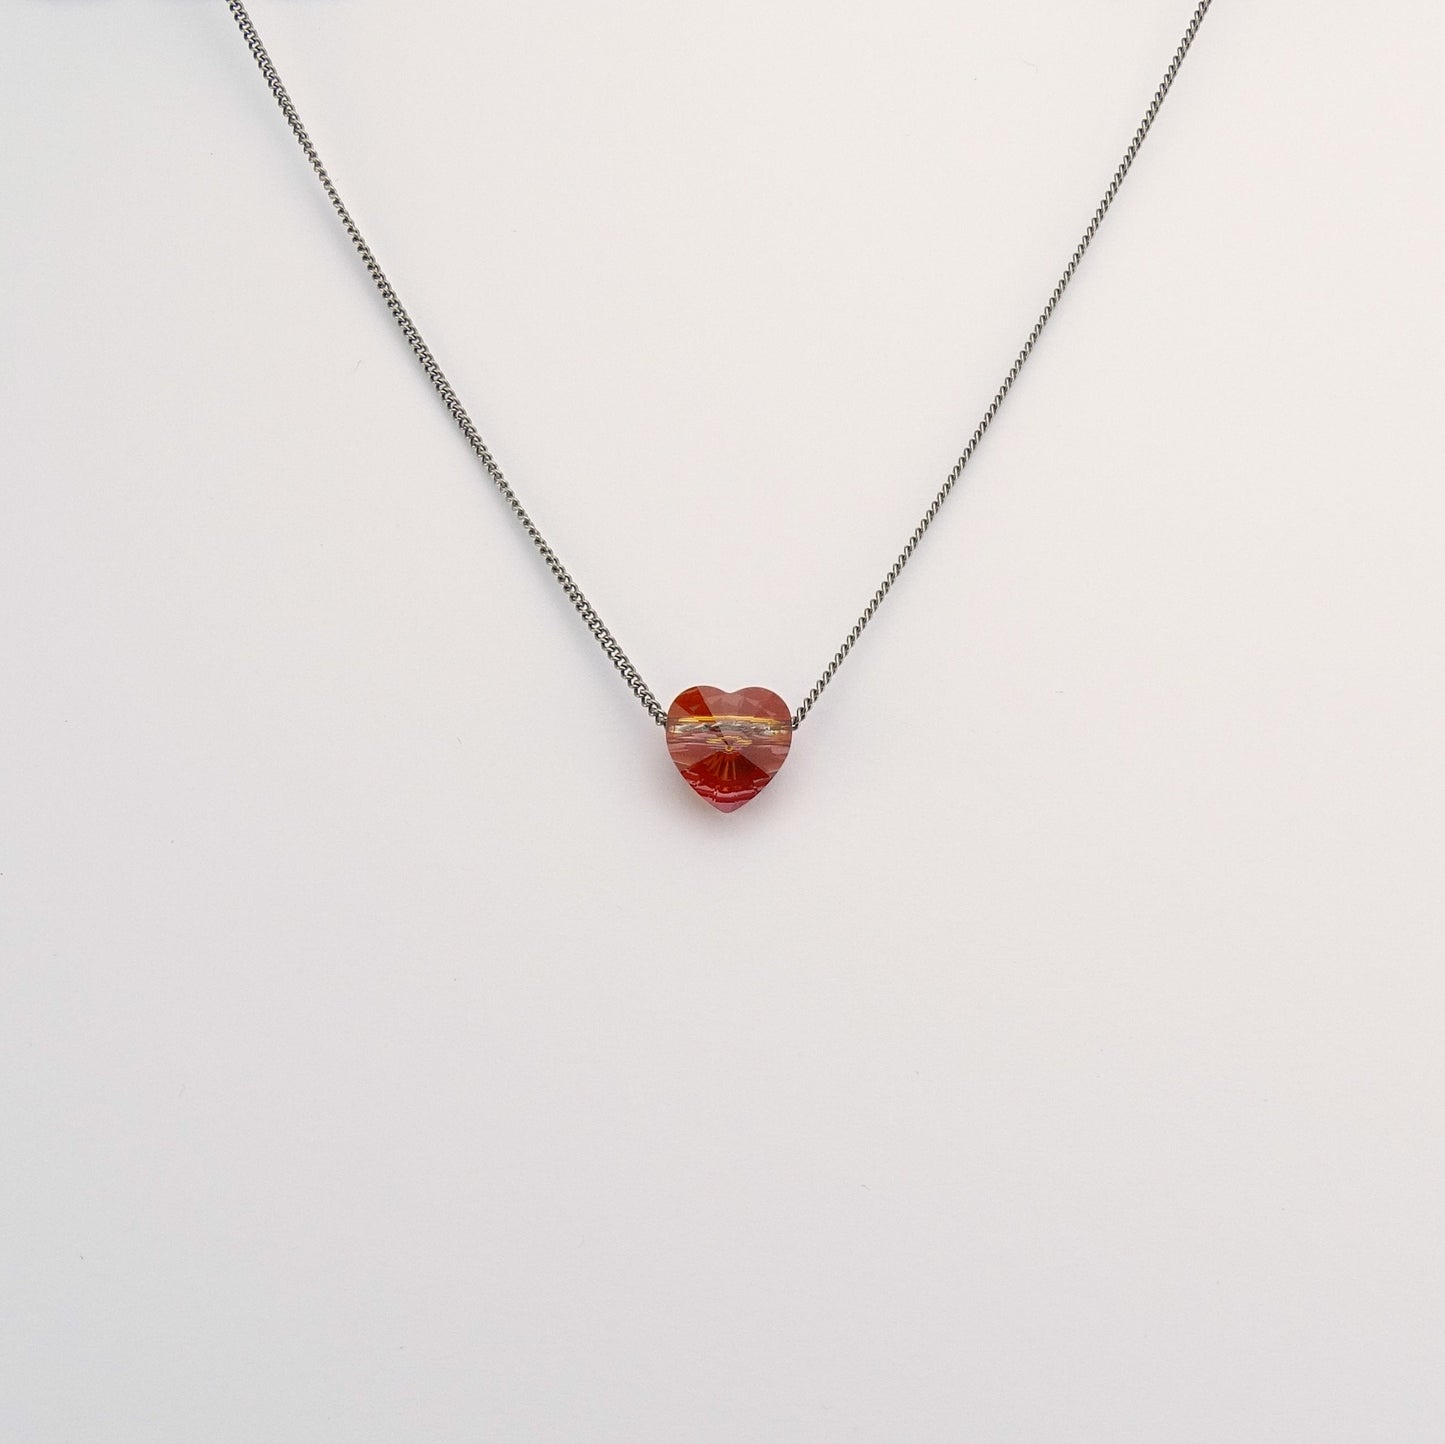 Red Magma Heart Titanium Necklace, Floating Heart Swarovski Crystal, Hypoallergenic Nickel Free Pure Titanium Necklace For Sensitive Skin